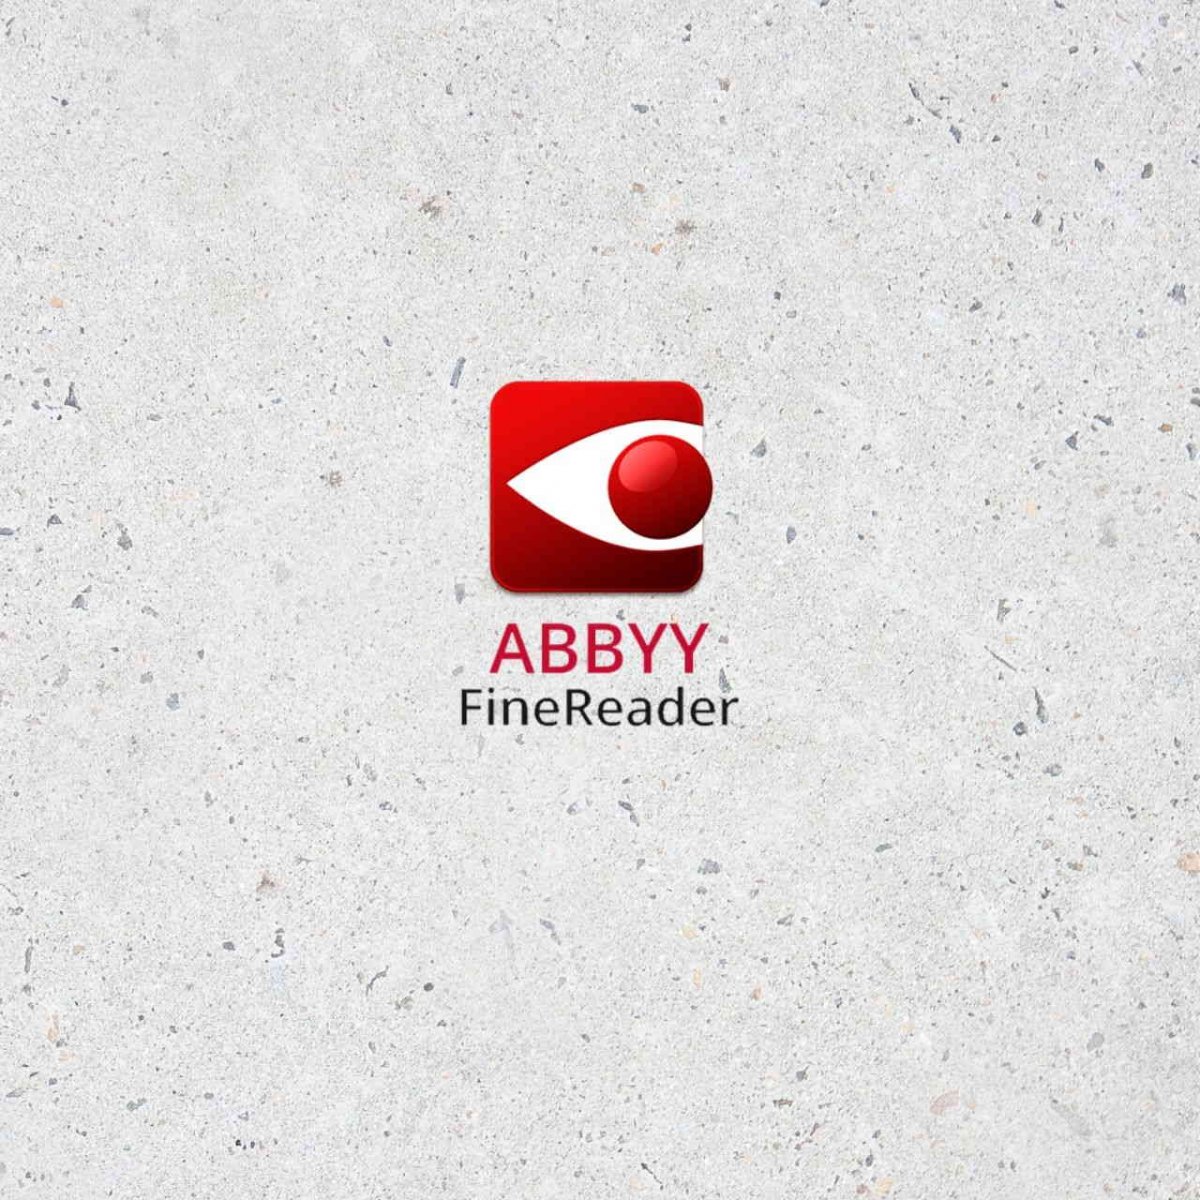 abbyy finereader free download cnet